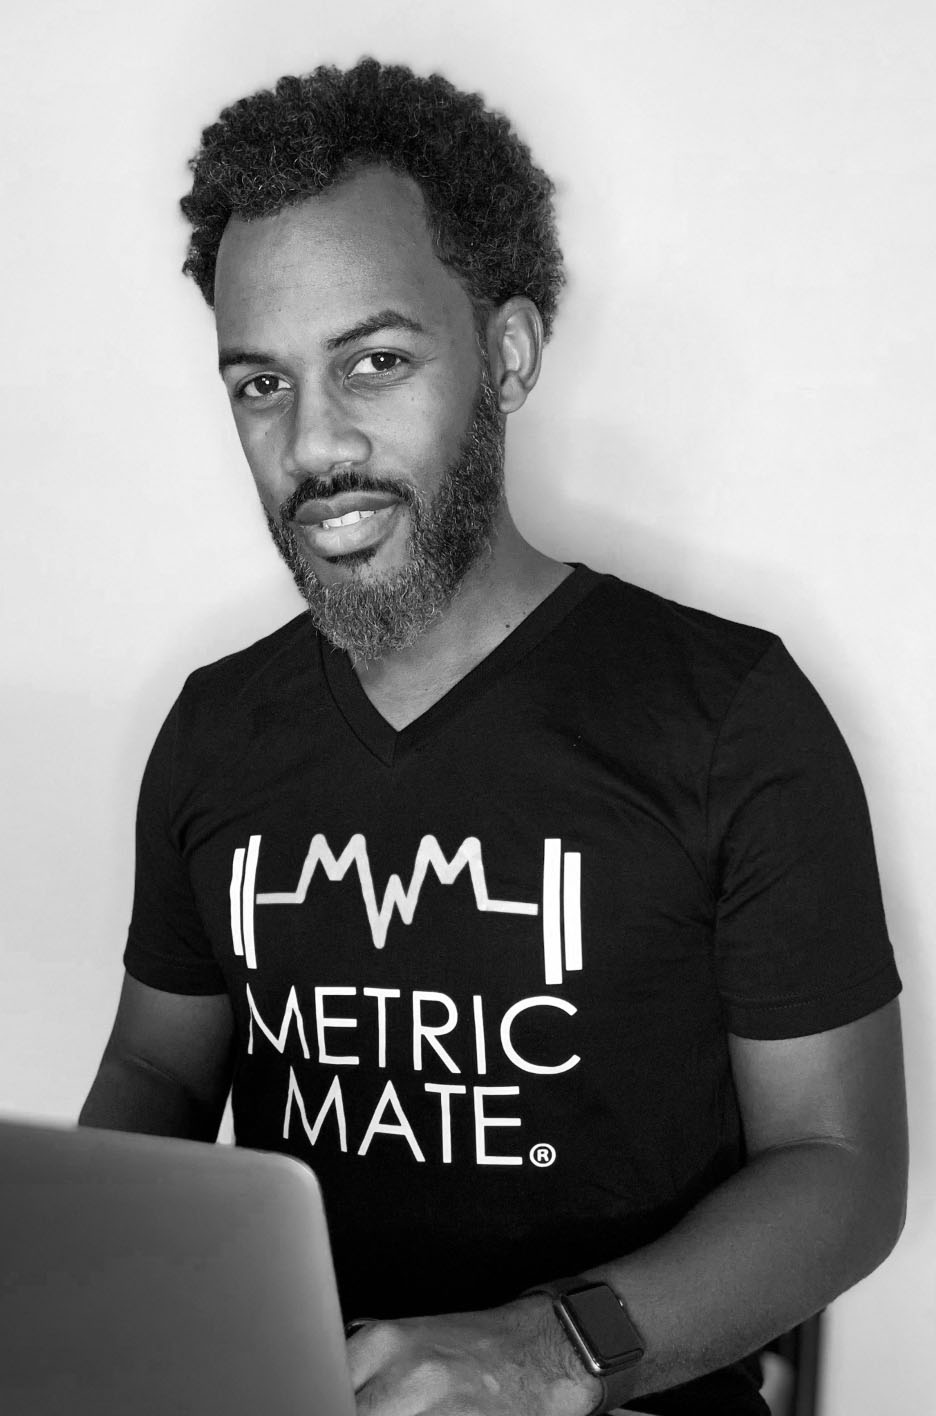 UT Cockrell School alumnus Ecleamus Ricks, Jr. is chief technology officer of Metric Mate, a fitness data analytics company that is a Georgia Top 40 Innovative Company. Ricks lives in Austin and is a board member of the Austin professional chapter of the National Society of Black Engineers (NSBE).